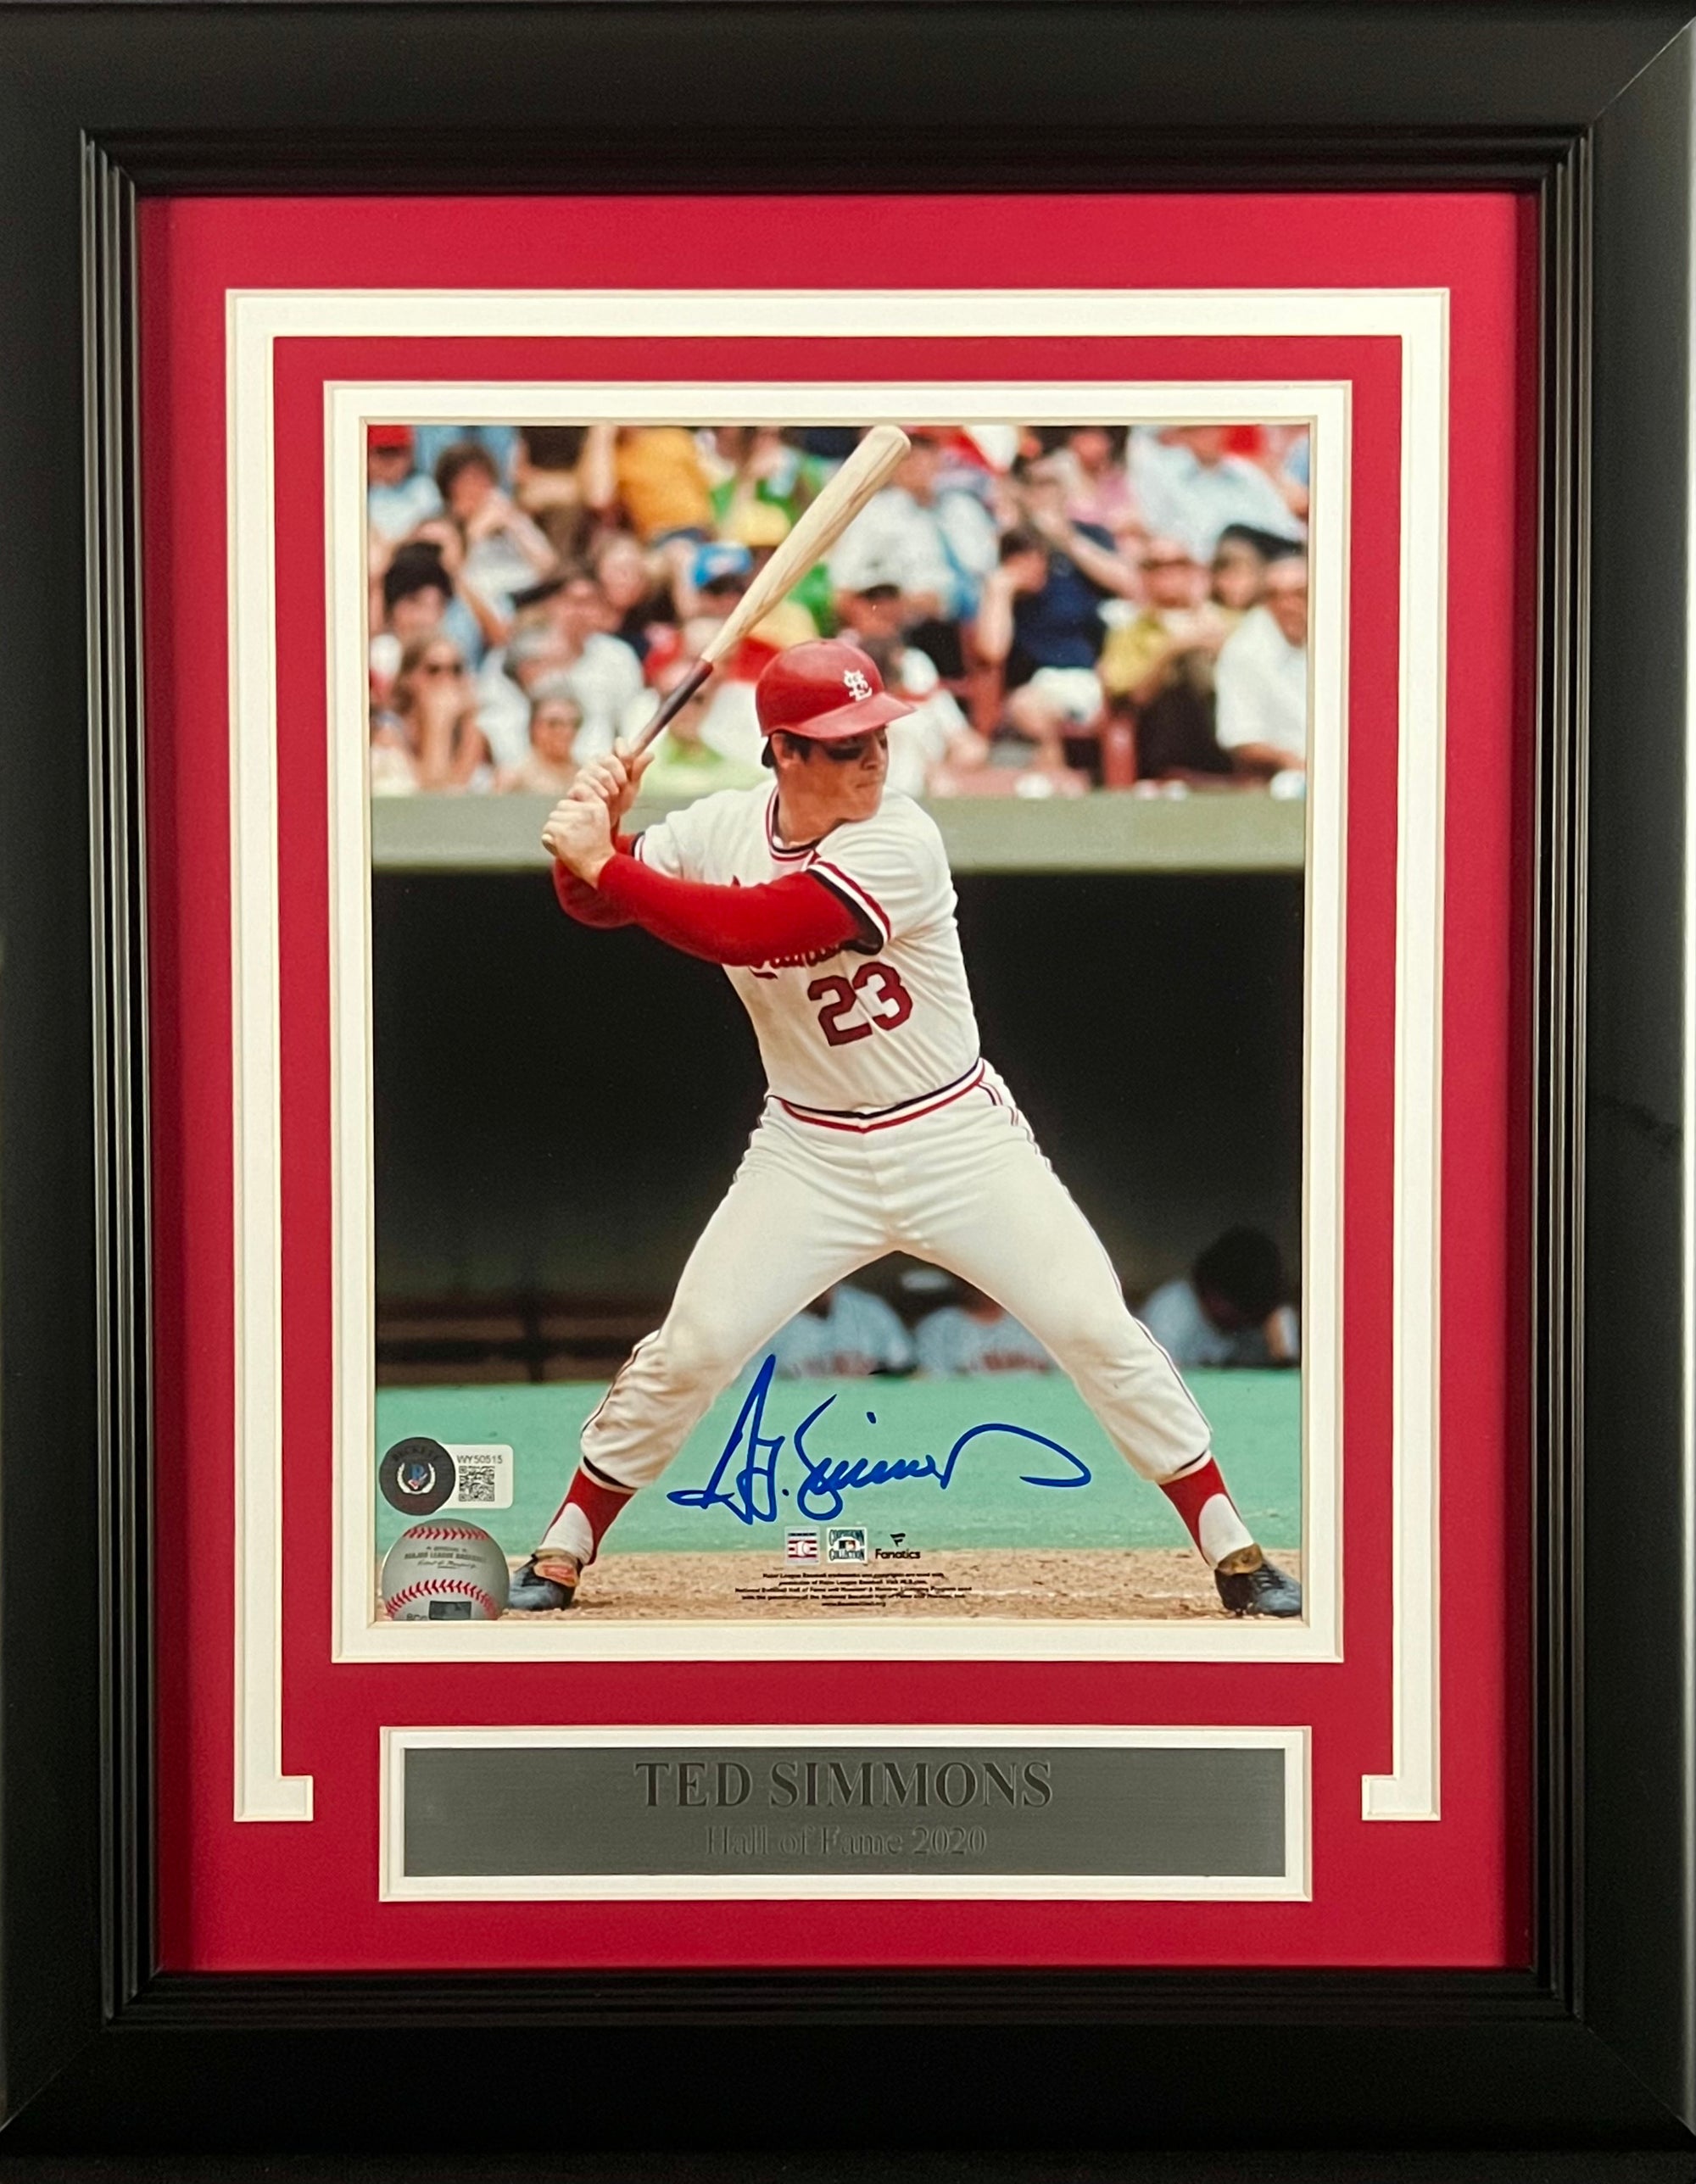 Ted Simmons St. Louis Cardinals Autographed 8x10 Photo Framed